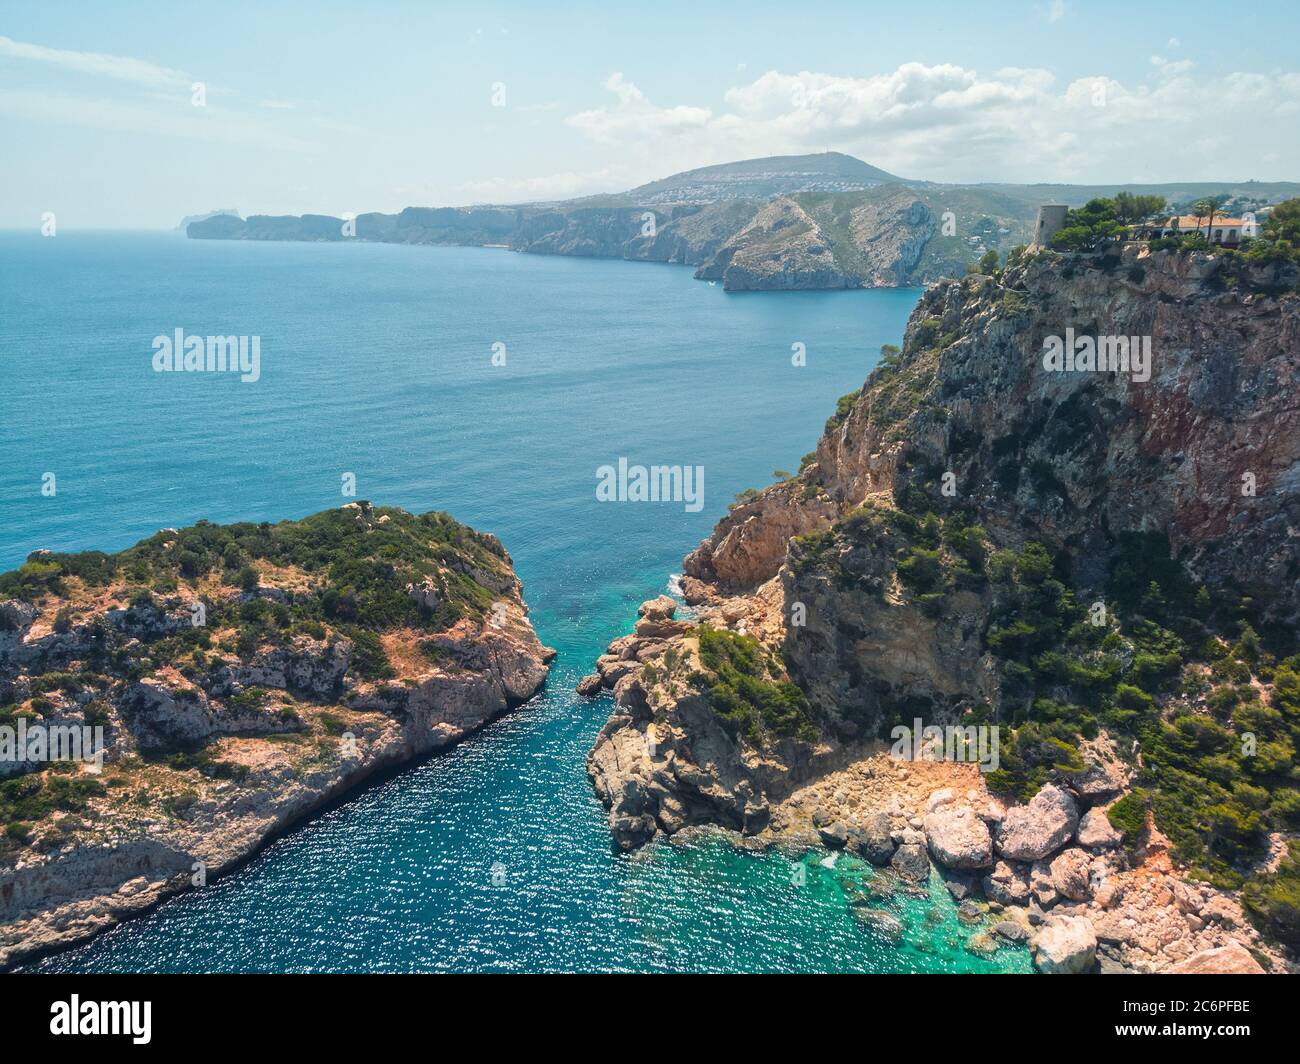 Aerial drone point of view photo picturesque turquoise bay green water lagoon of Mediterranean Sea, huge mountains, rocky coastline, idyllic scenery Stock Photo